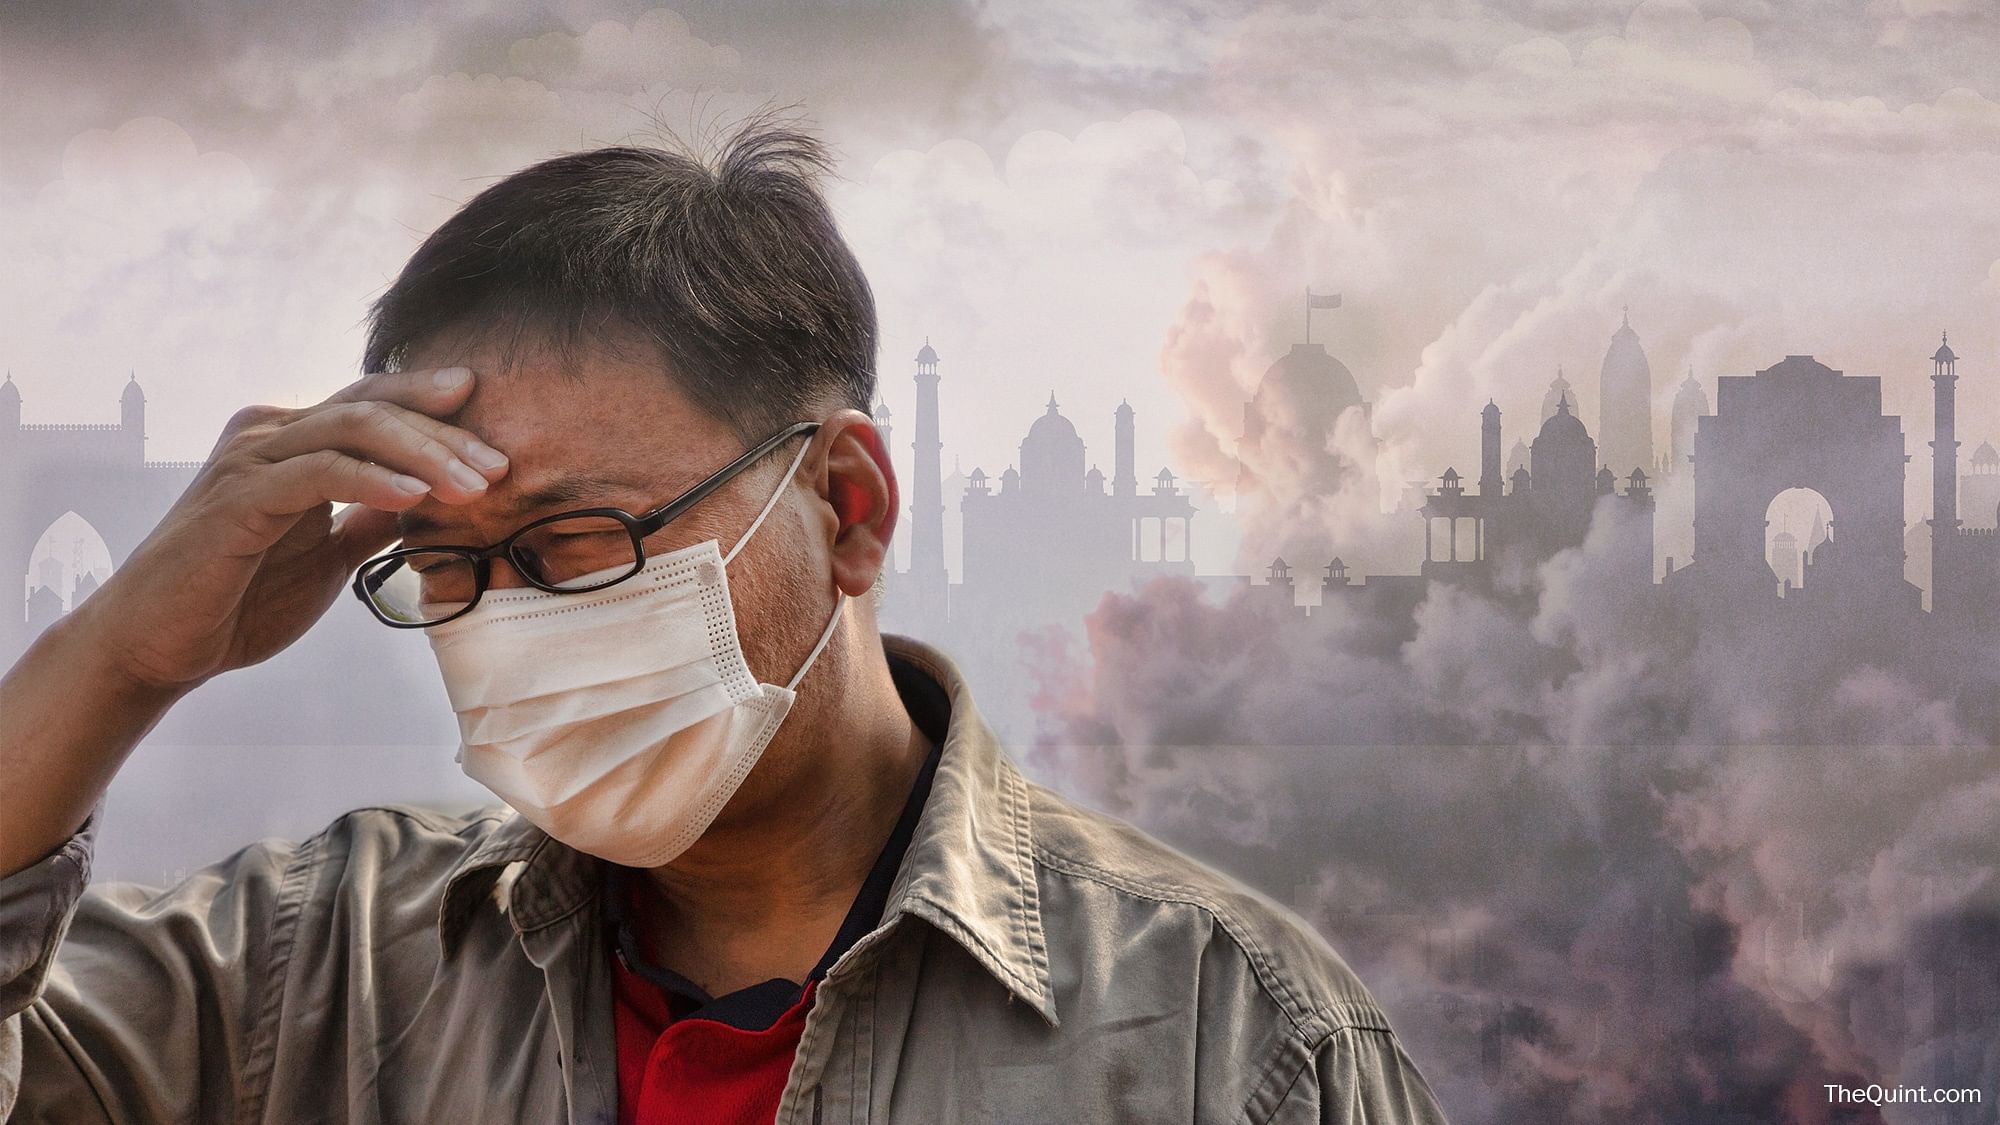 Delhi and its surrounding regions has been cloaked in a deathly smog over the past 10 days, posing a huge health and safety hazard. Image used for representational purposes.